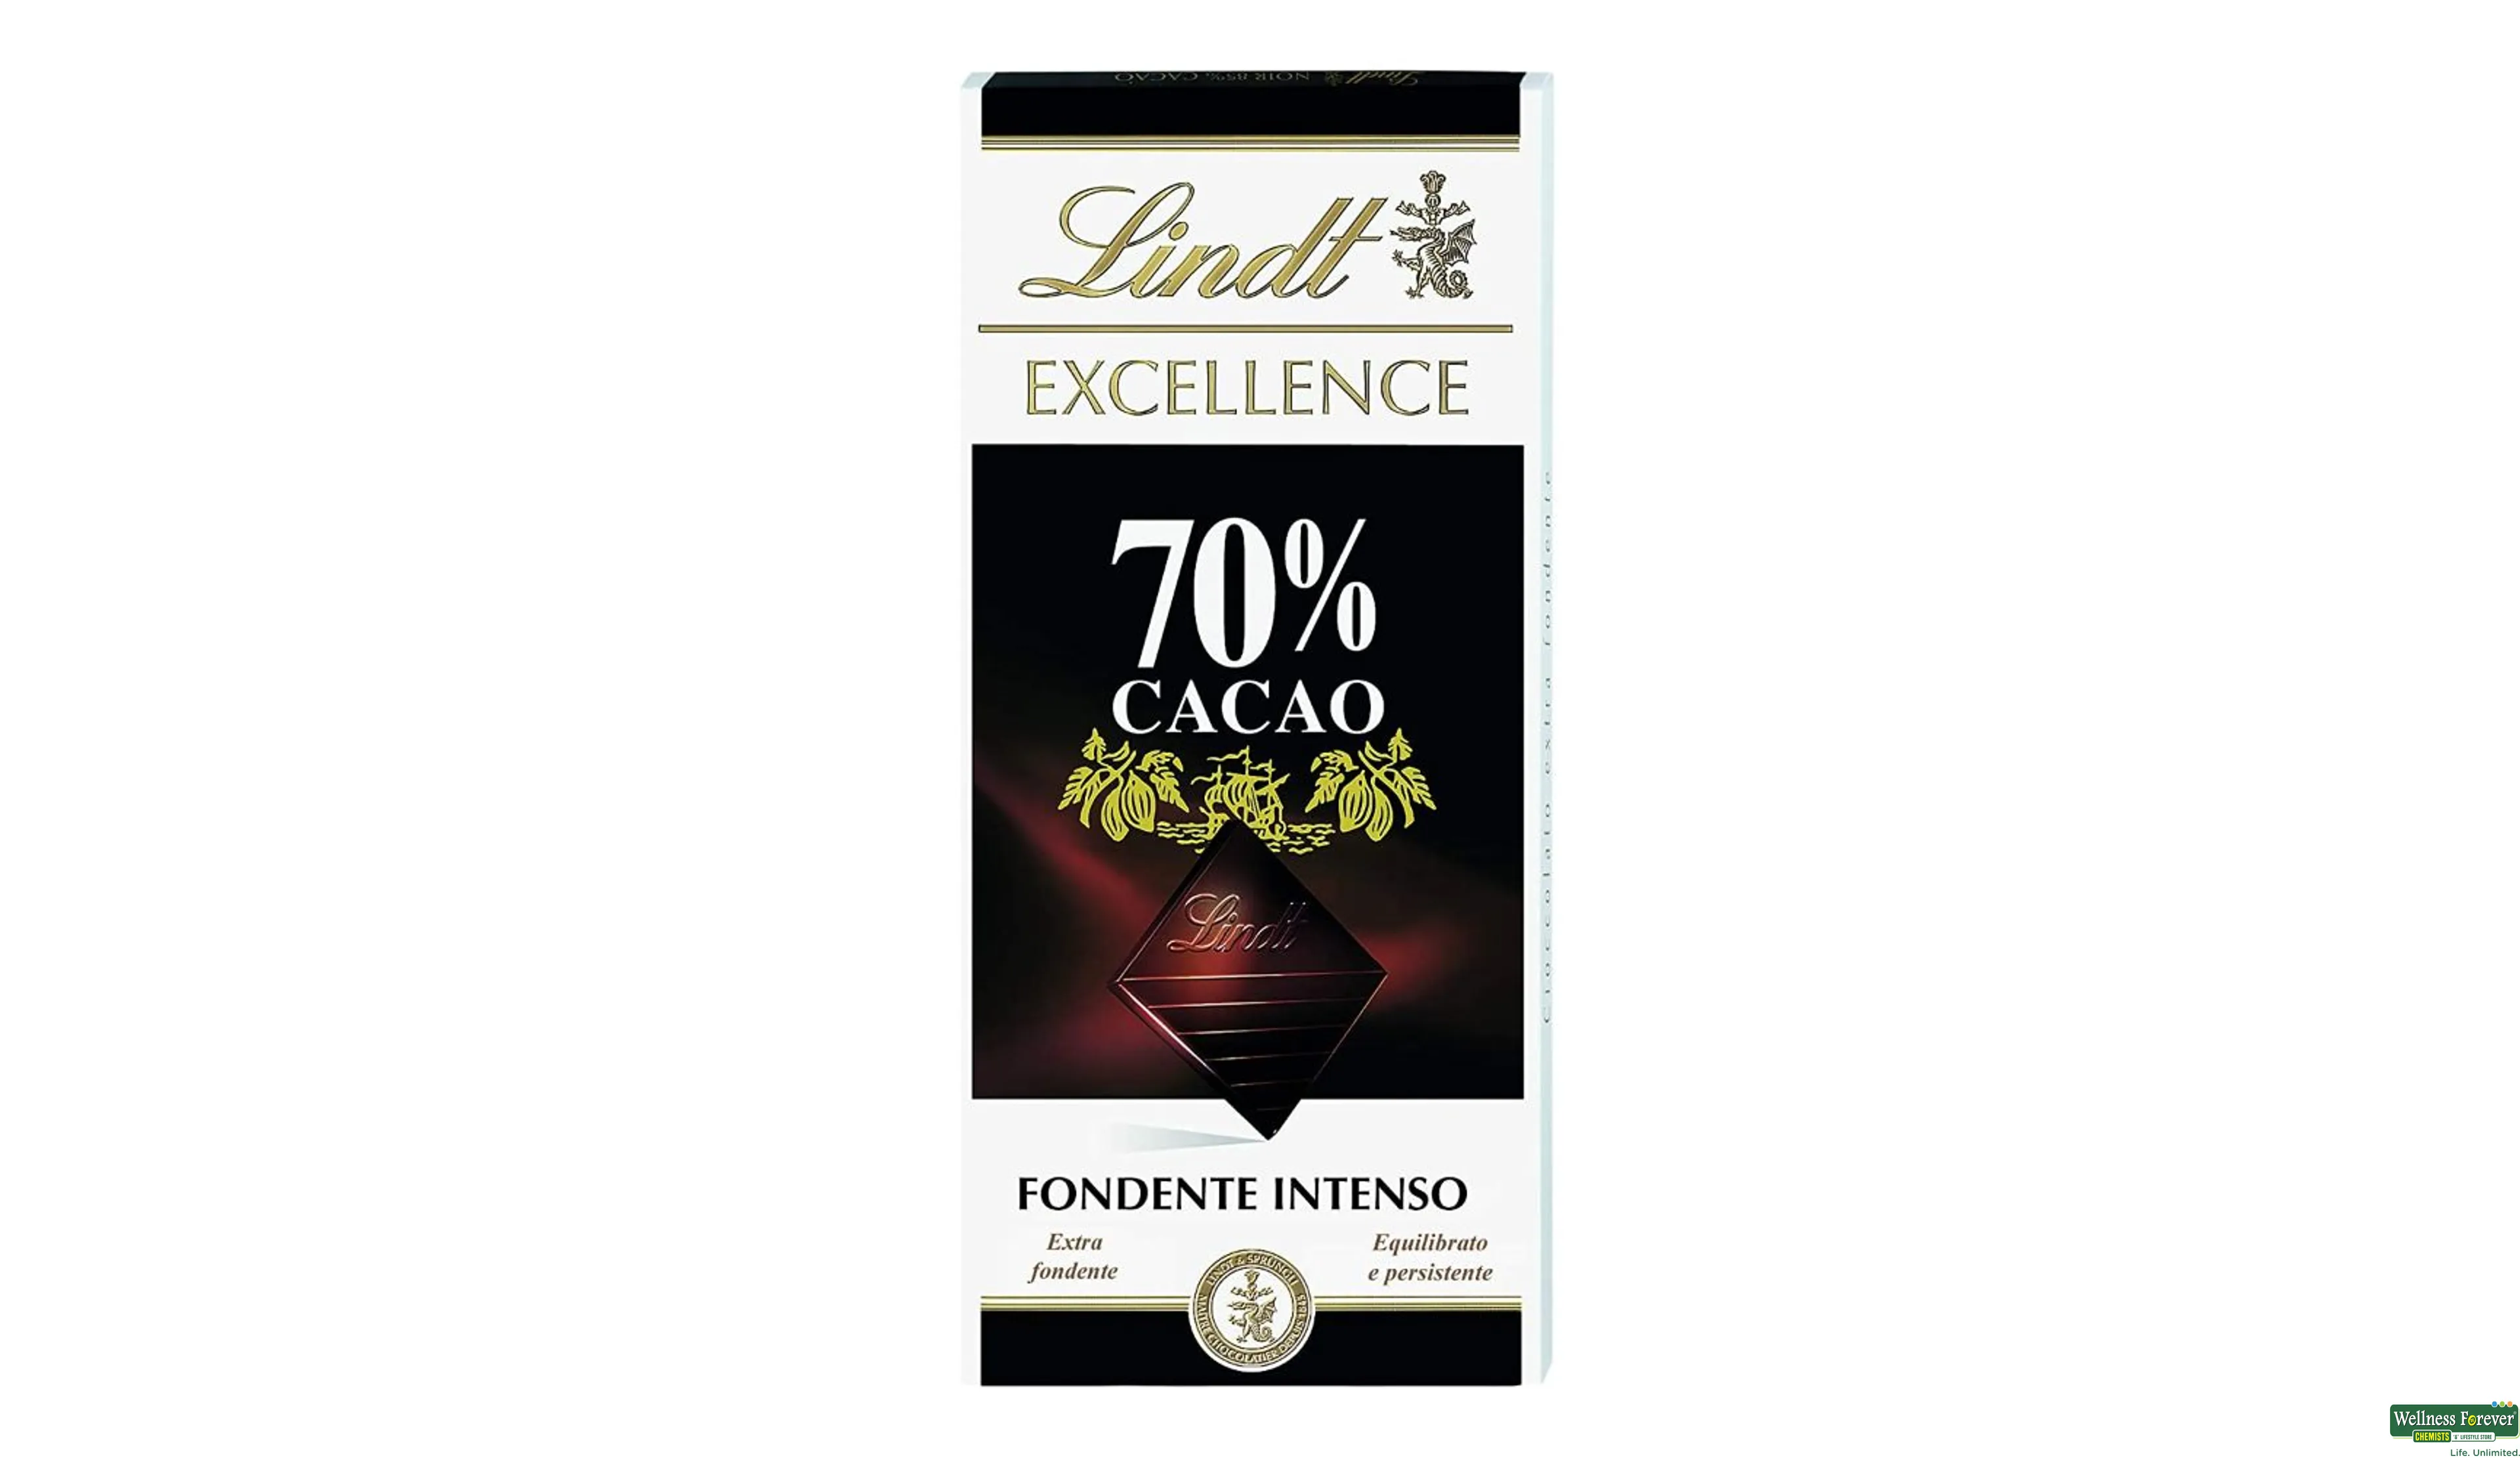 LINDT CHOC EXCE COCOA DARK 70% 100GM-I- 1, 100GM, 